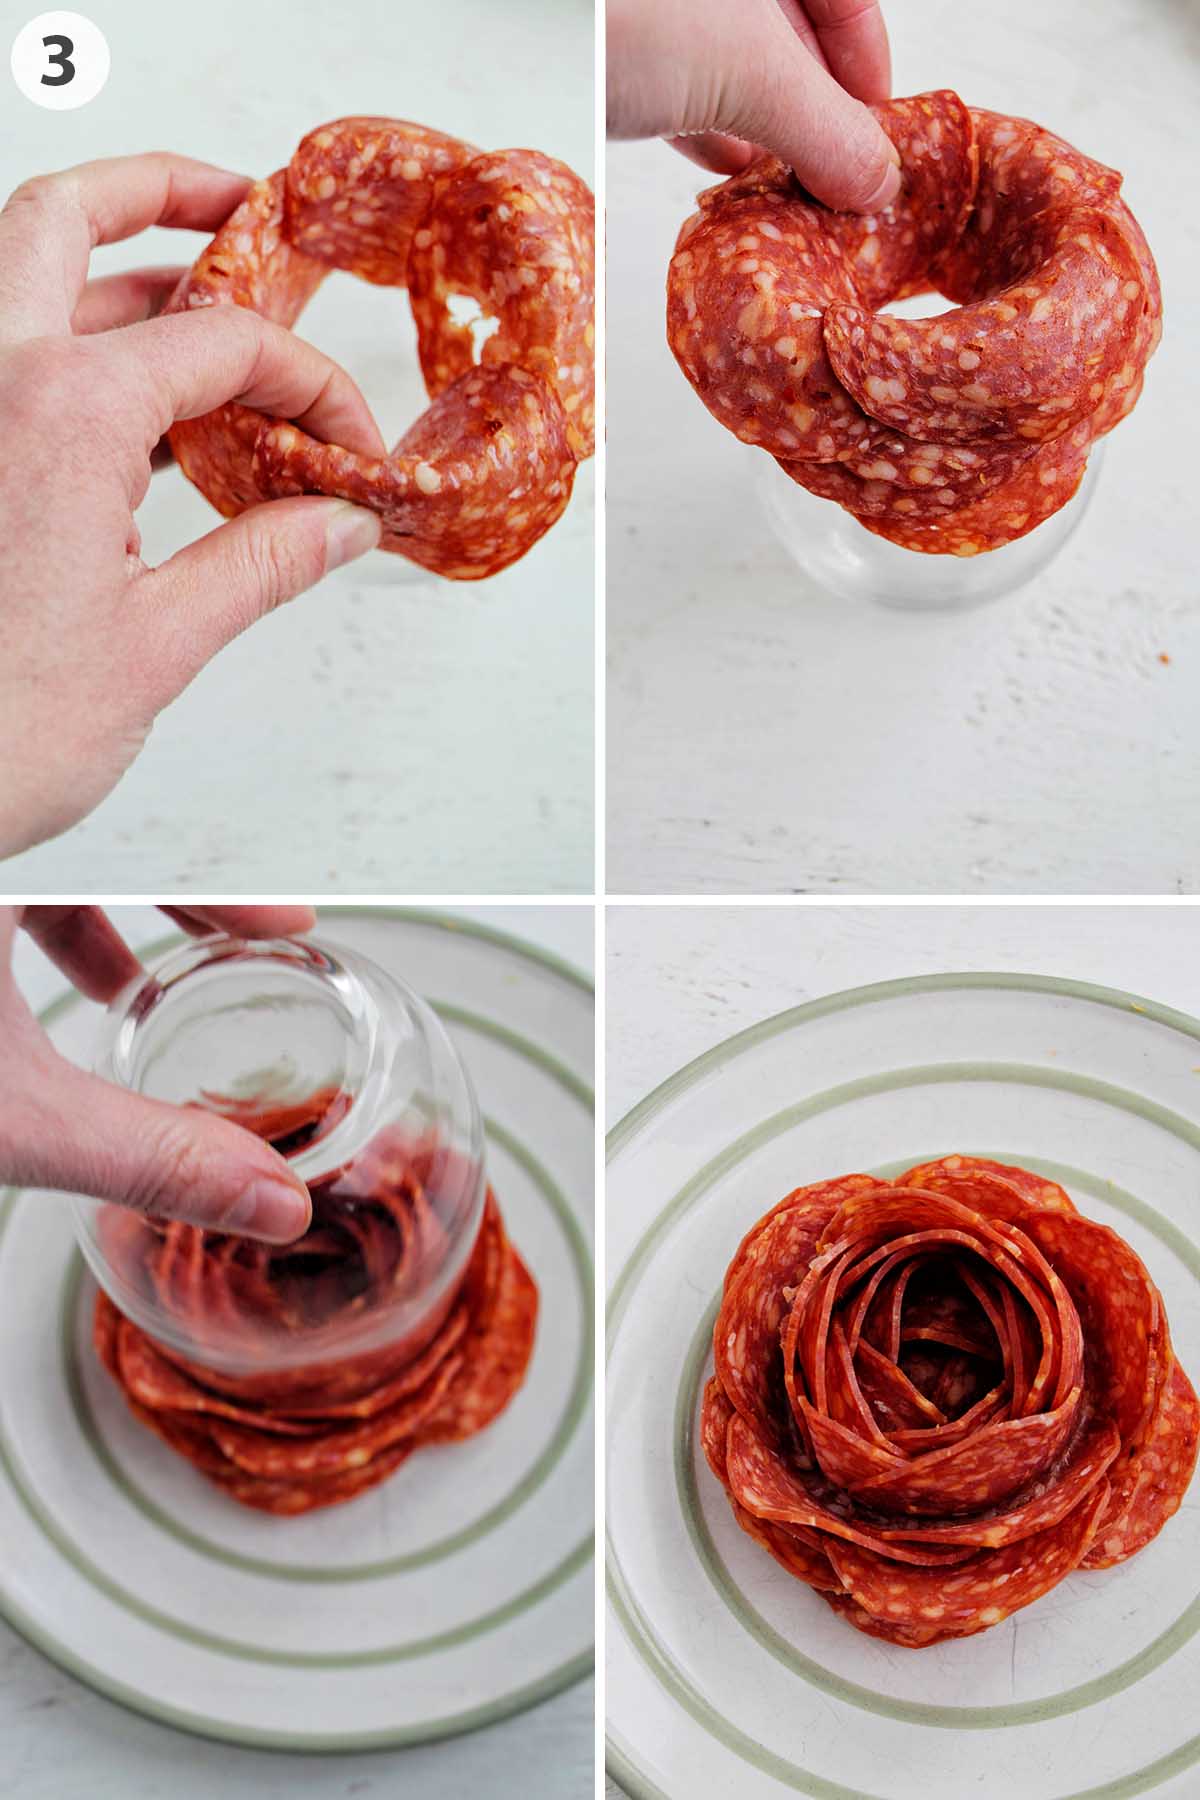 numbered photo showing how to make sausage meat flower.